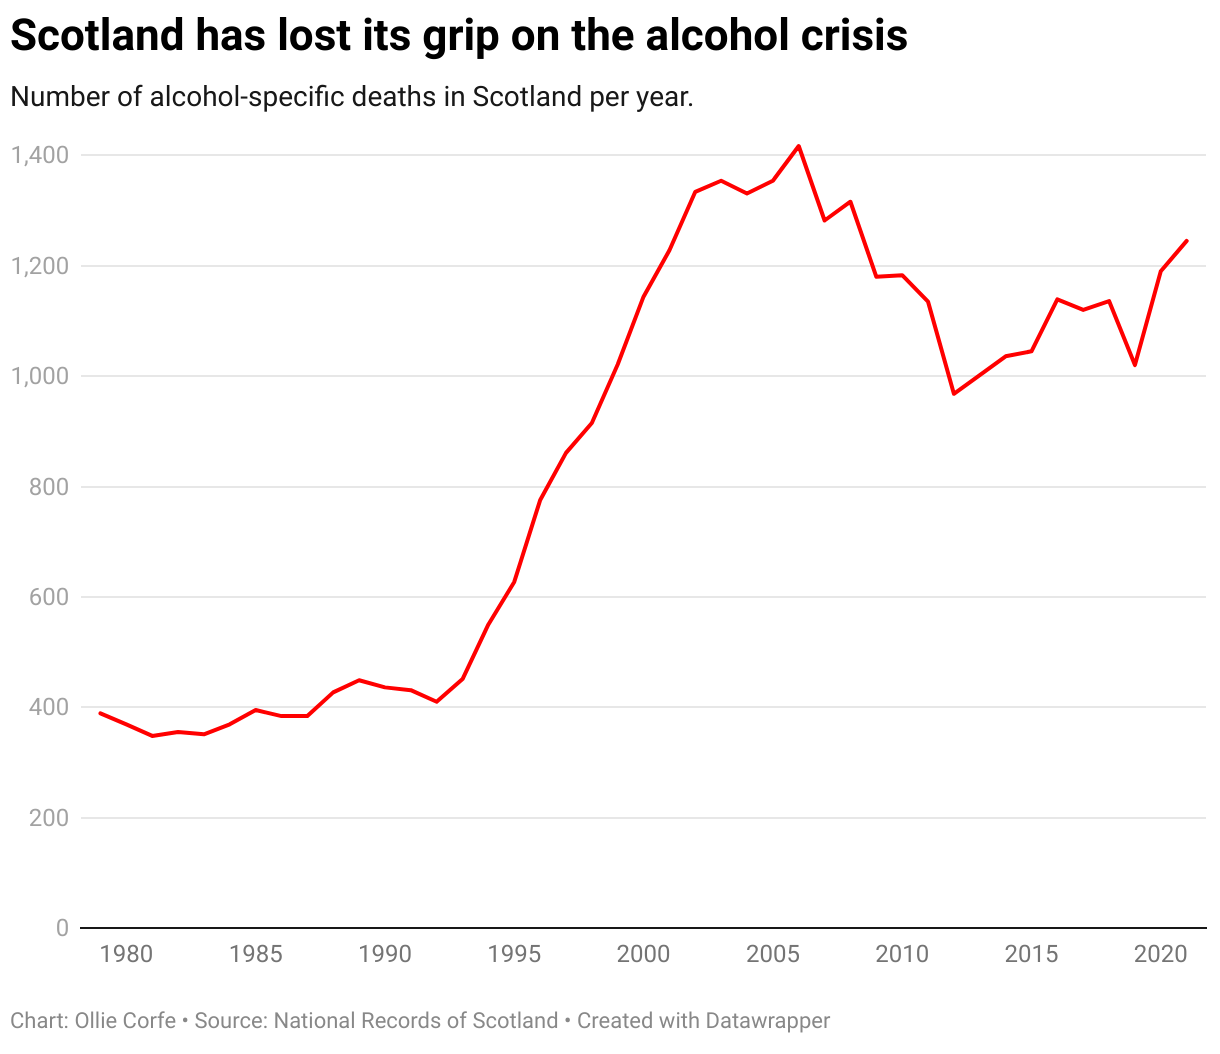 Chart displaying the annual alcohol-specific death tallies in Scotland.